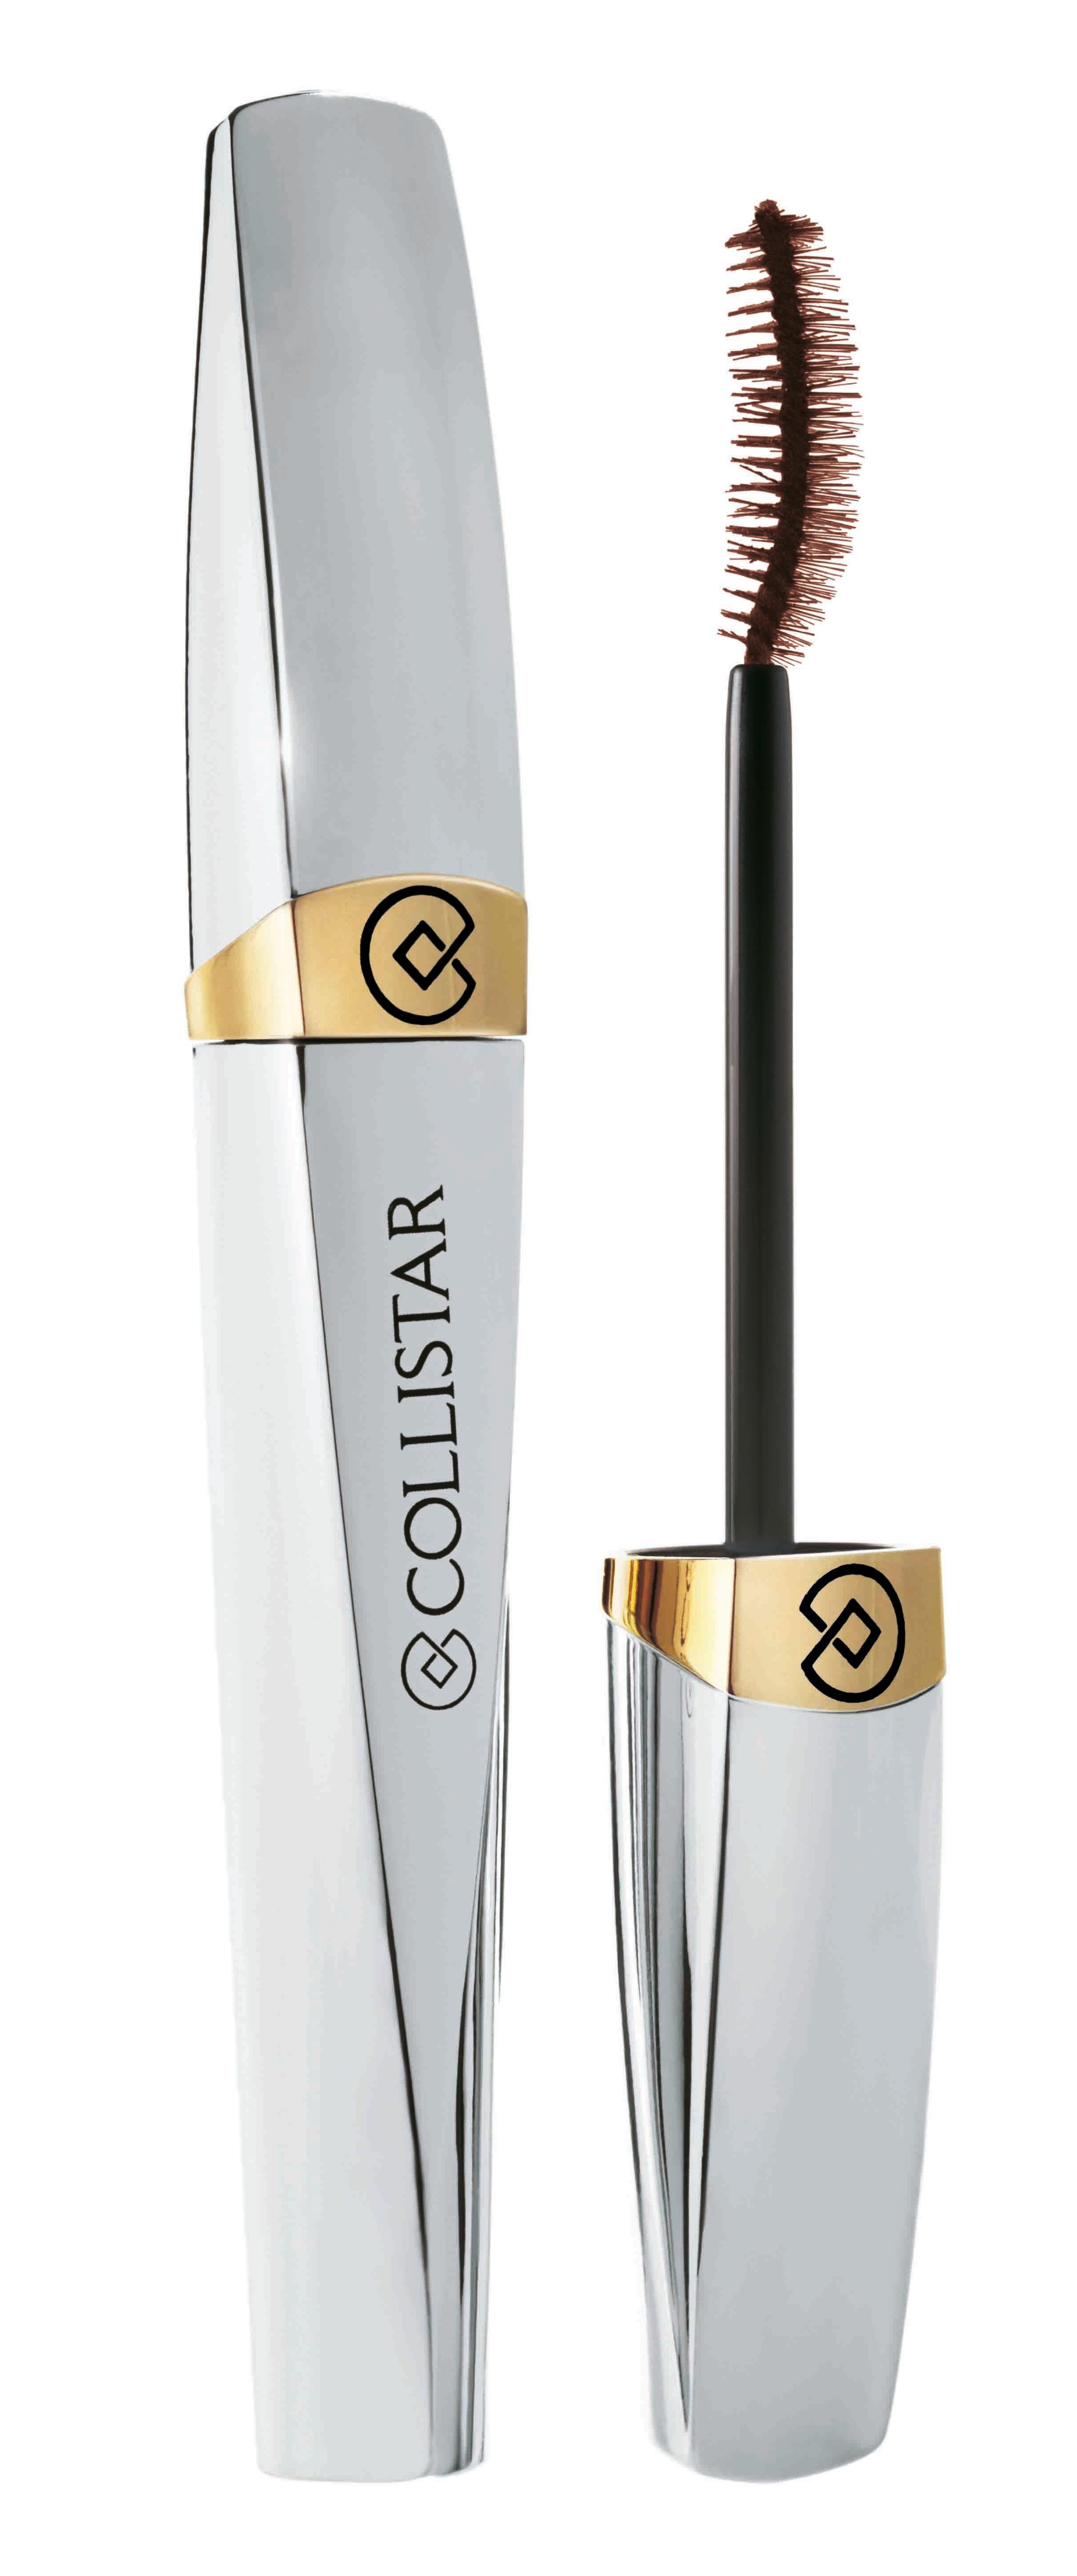 Image of COLLISTAR Shock Mascara Natural Brown - ONE SIZE